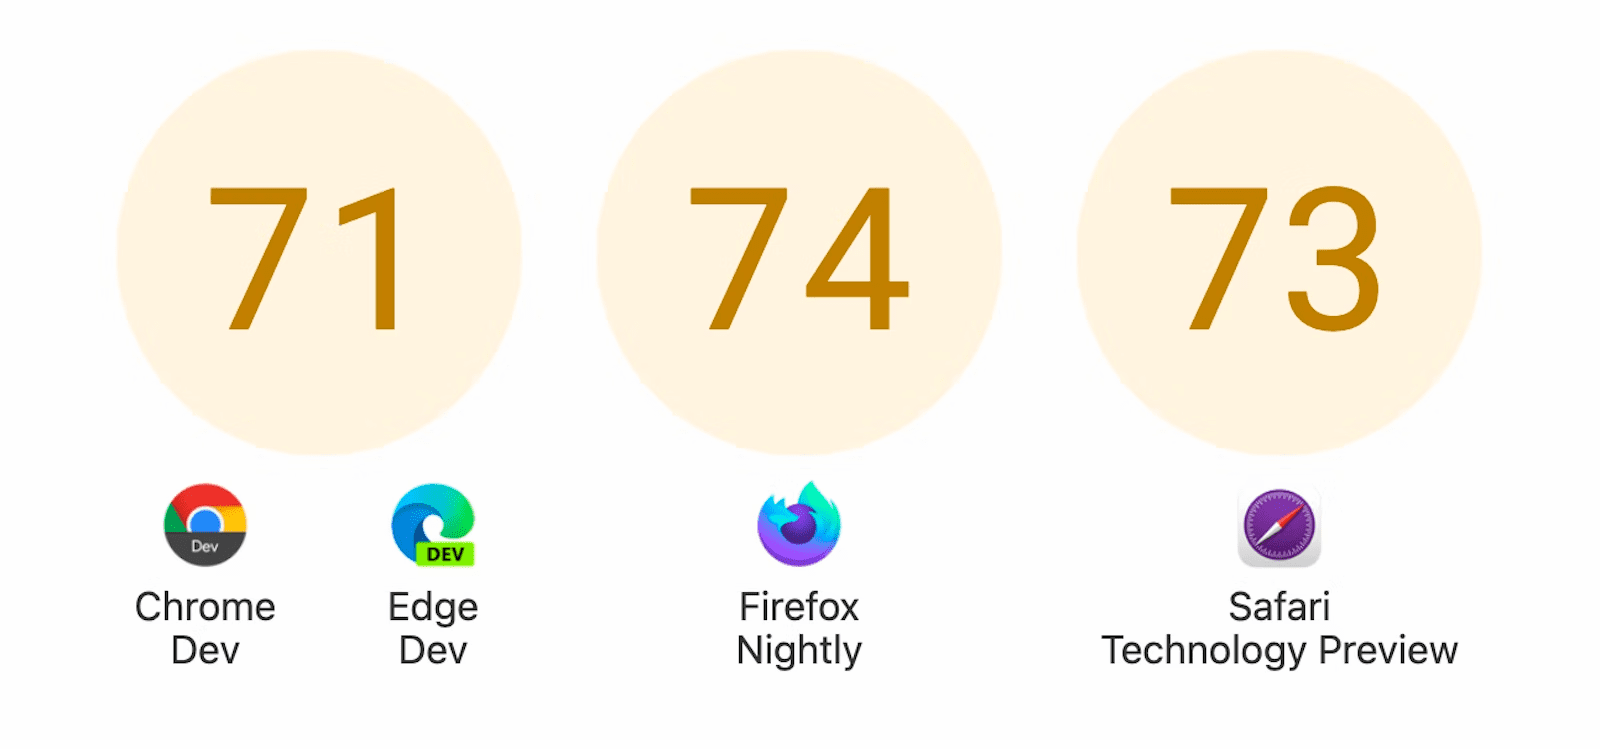 Showing three circles with scores: 71 for Chrome Dev and Edge Dev, 74 for Firefox Nightly, and 73 for Safari Technology Preview.